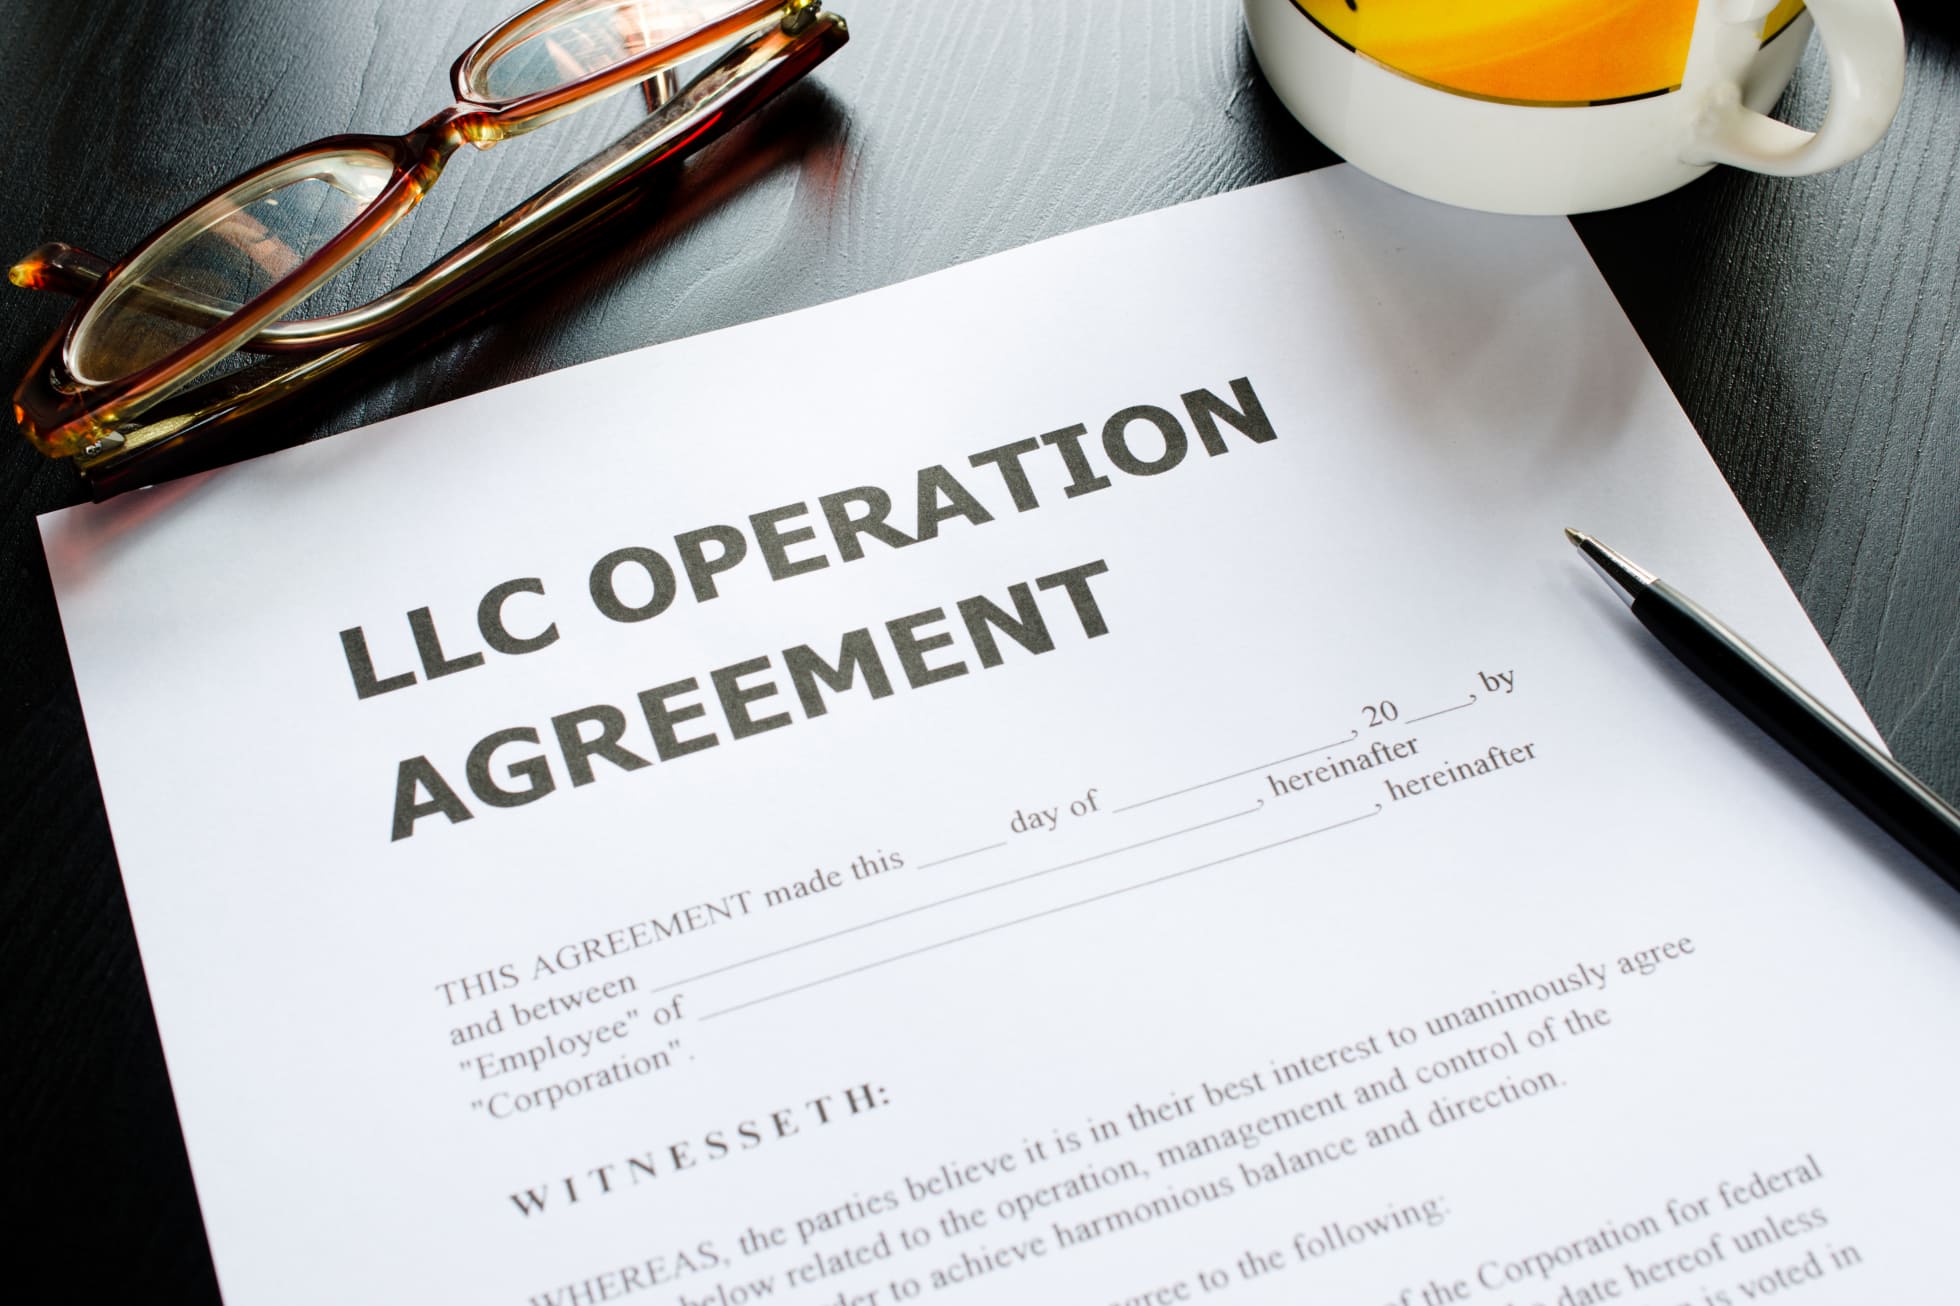 Operating Agreements are Key to Formation Process